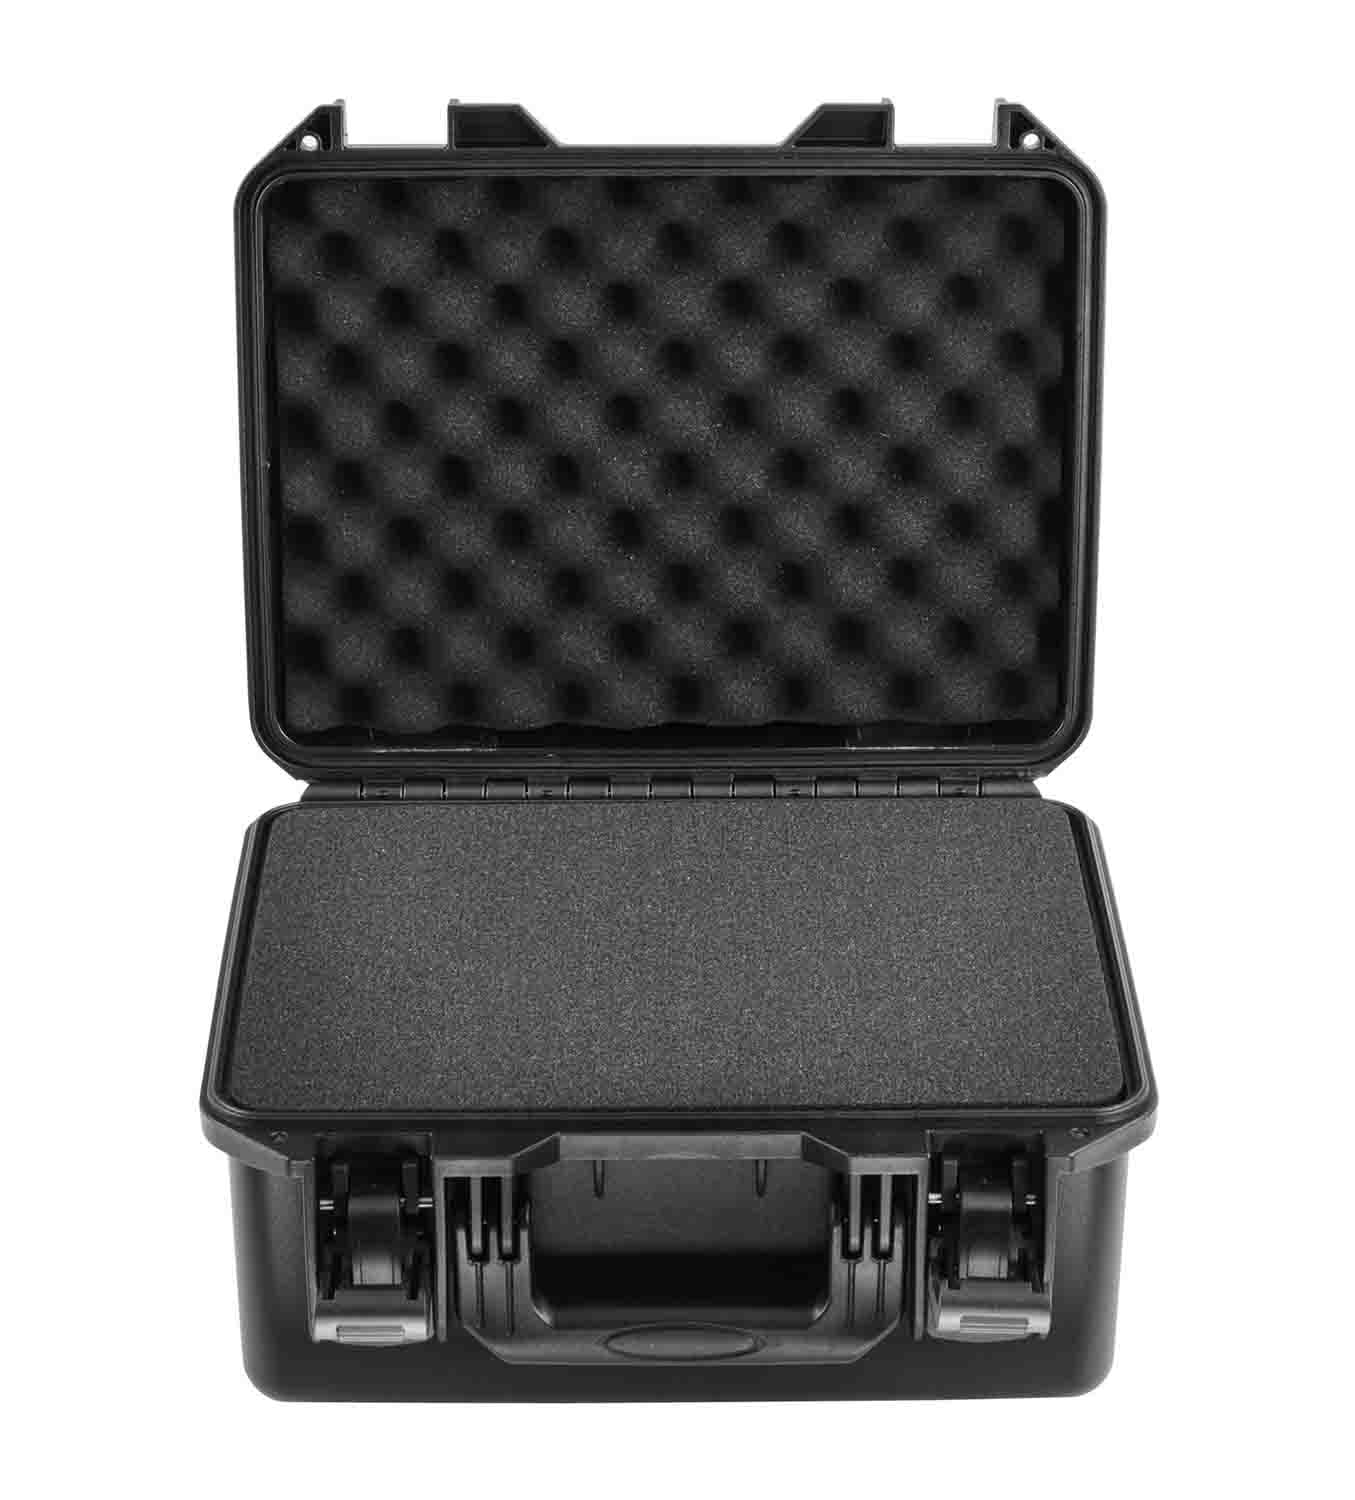 Odyssey VU120906 Vulcan Injection-Molded Utility Case with Pluck Foam - 13 x 9.5 x 5" Interior - Hollywood DJ